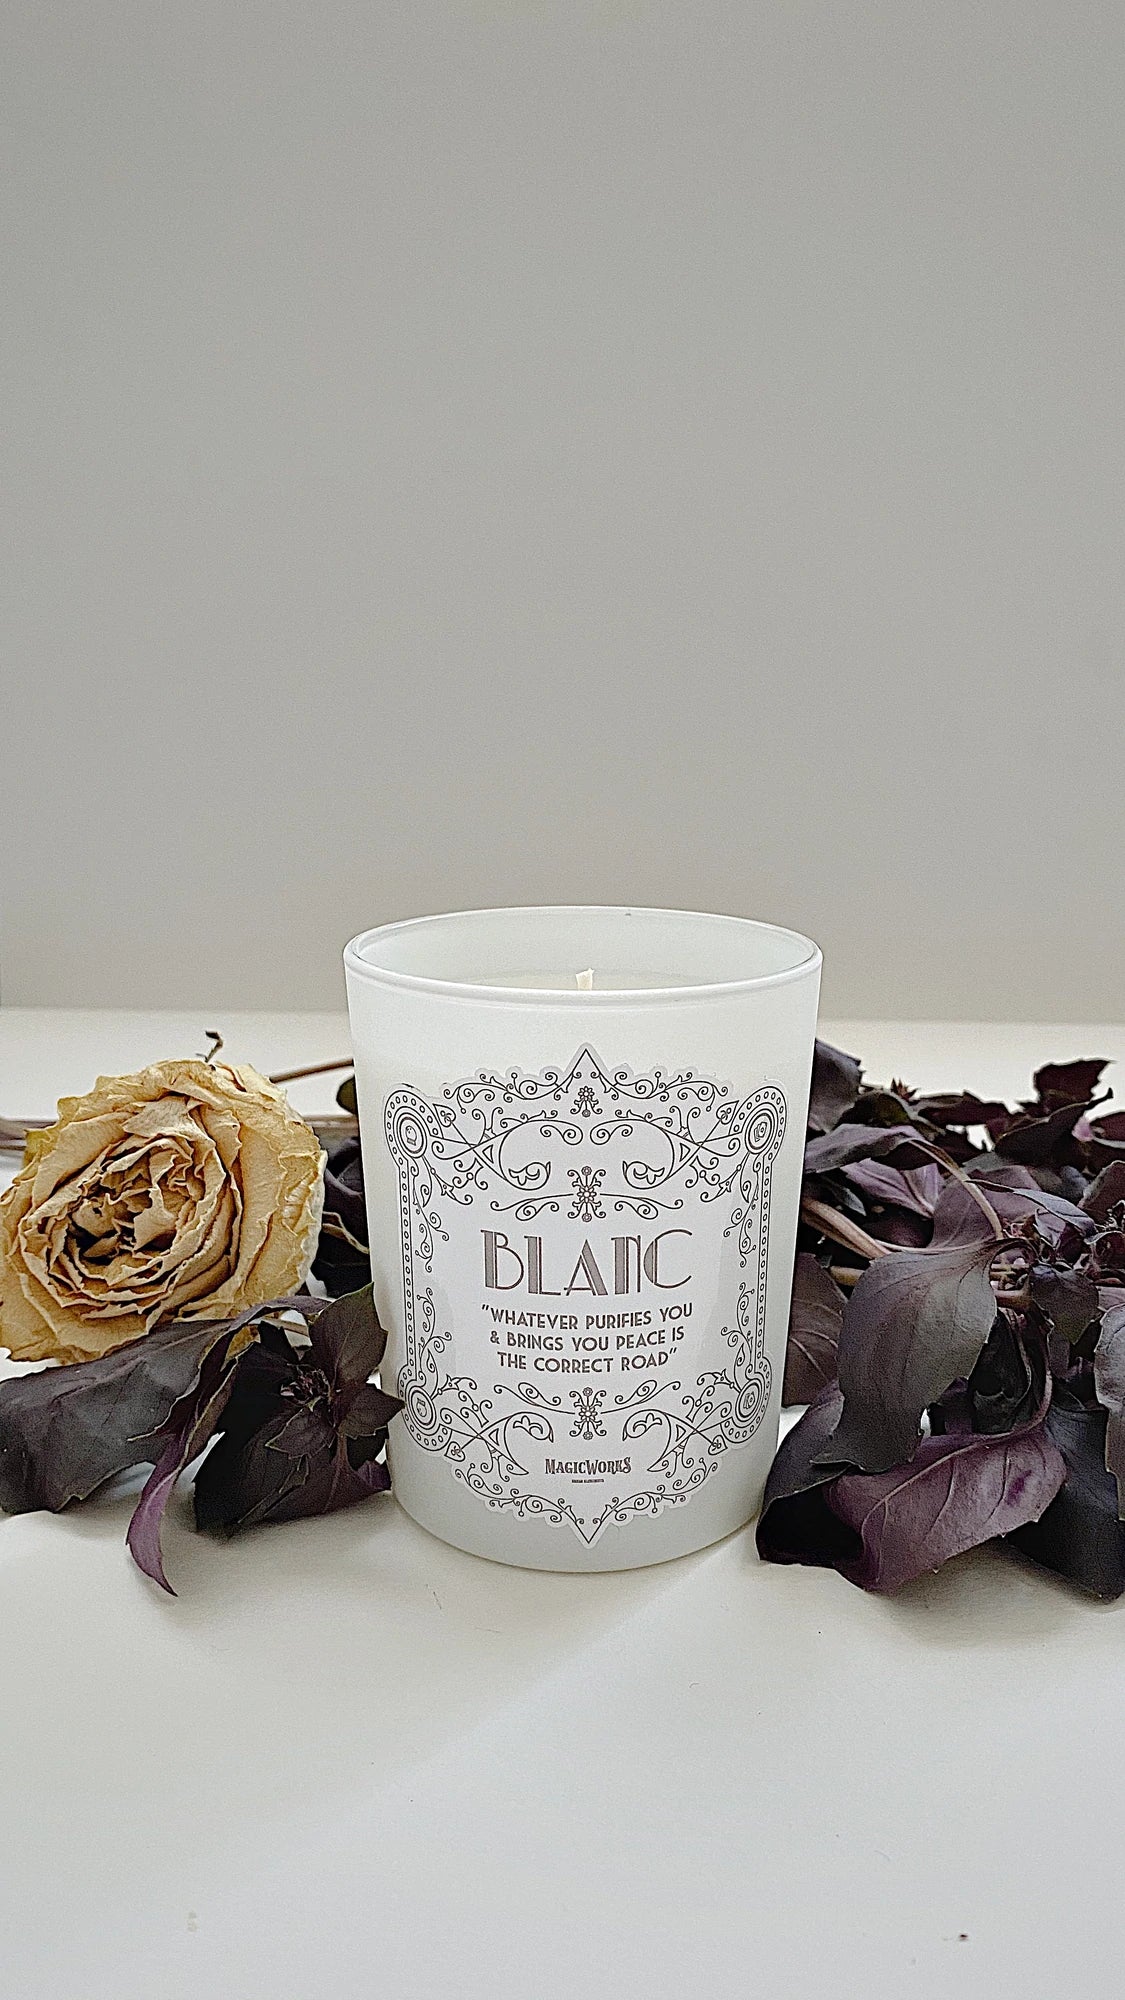 BLANC – “Whatever Purifies You & brings You Peace IS The Correct Road” candle